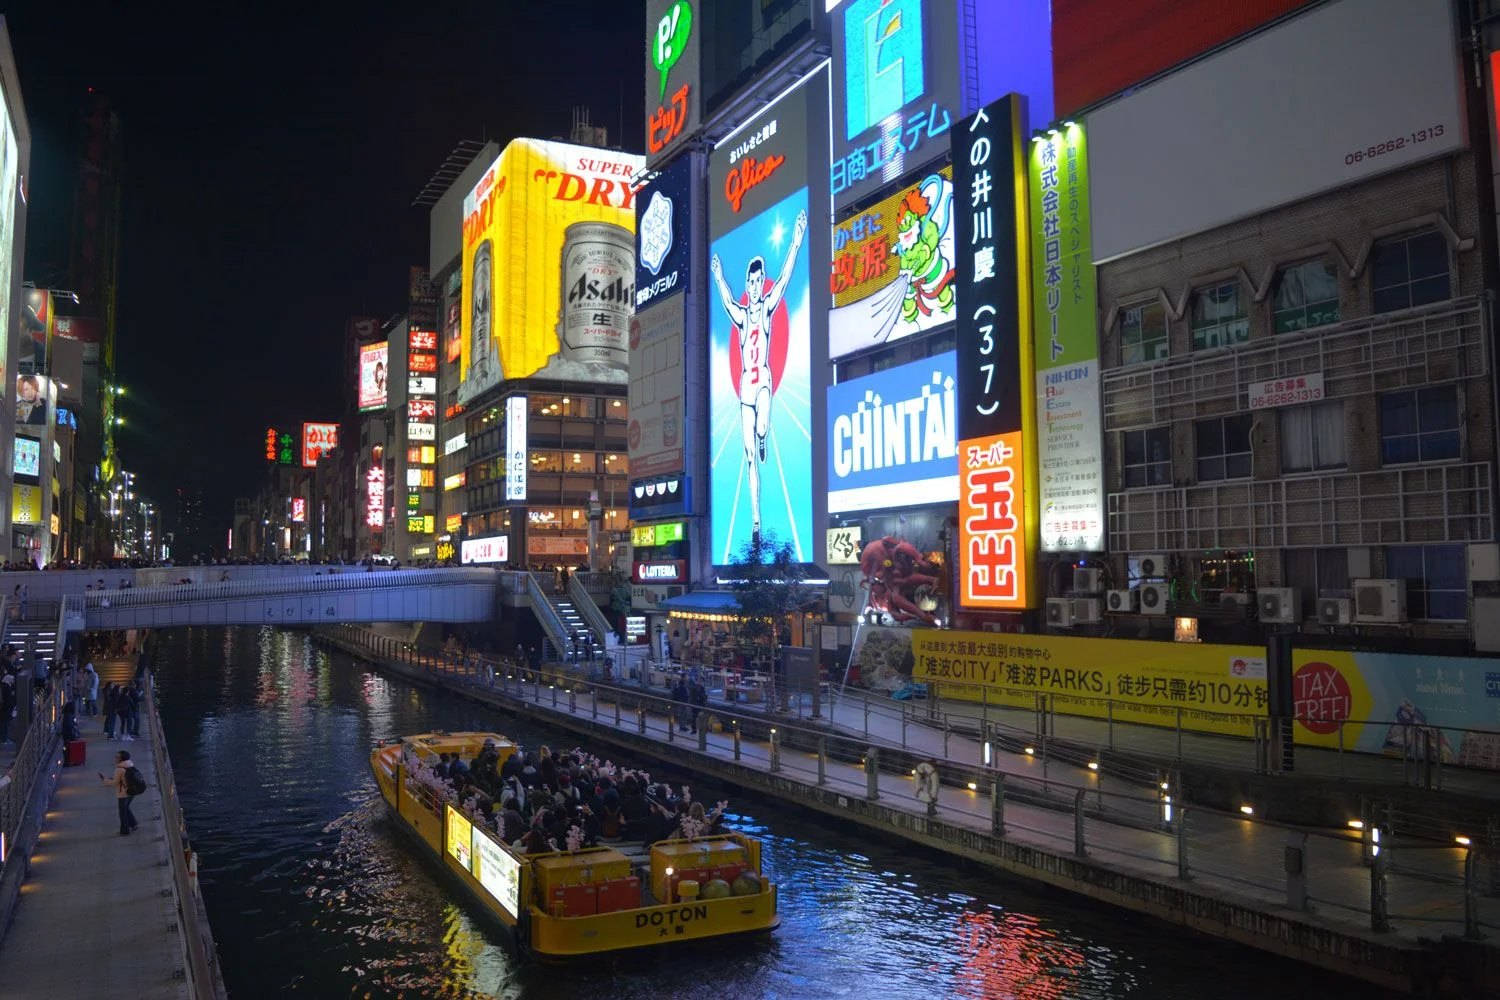 things to do in Osaka